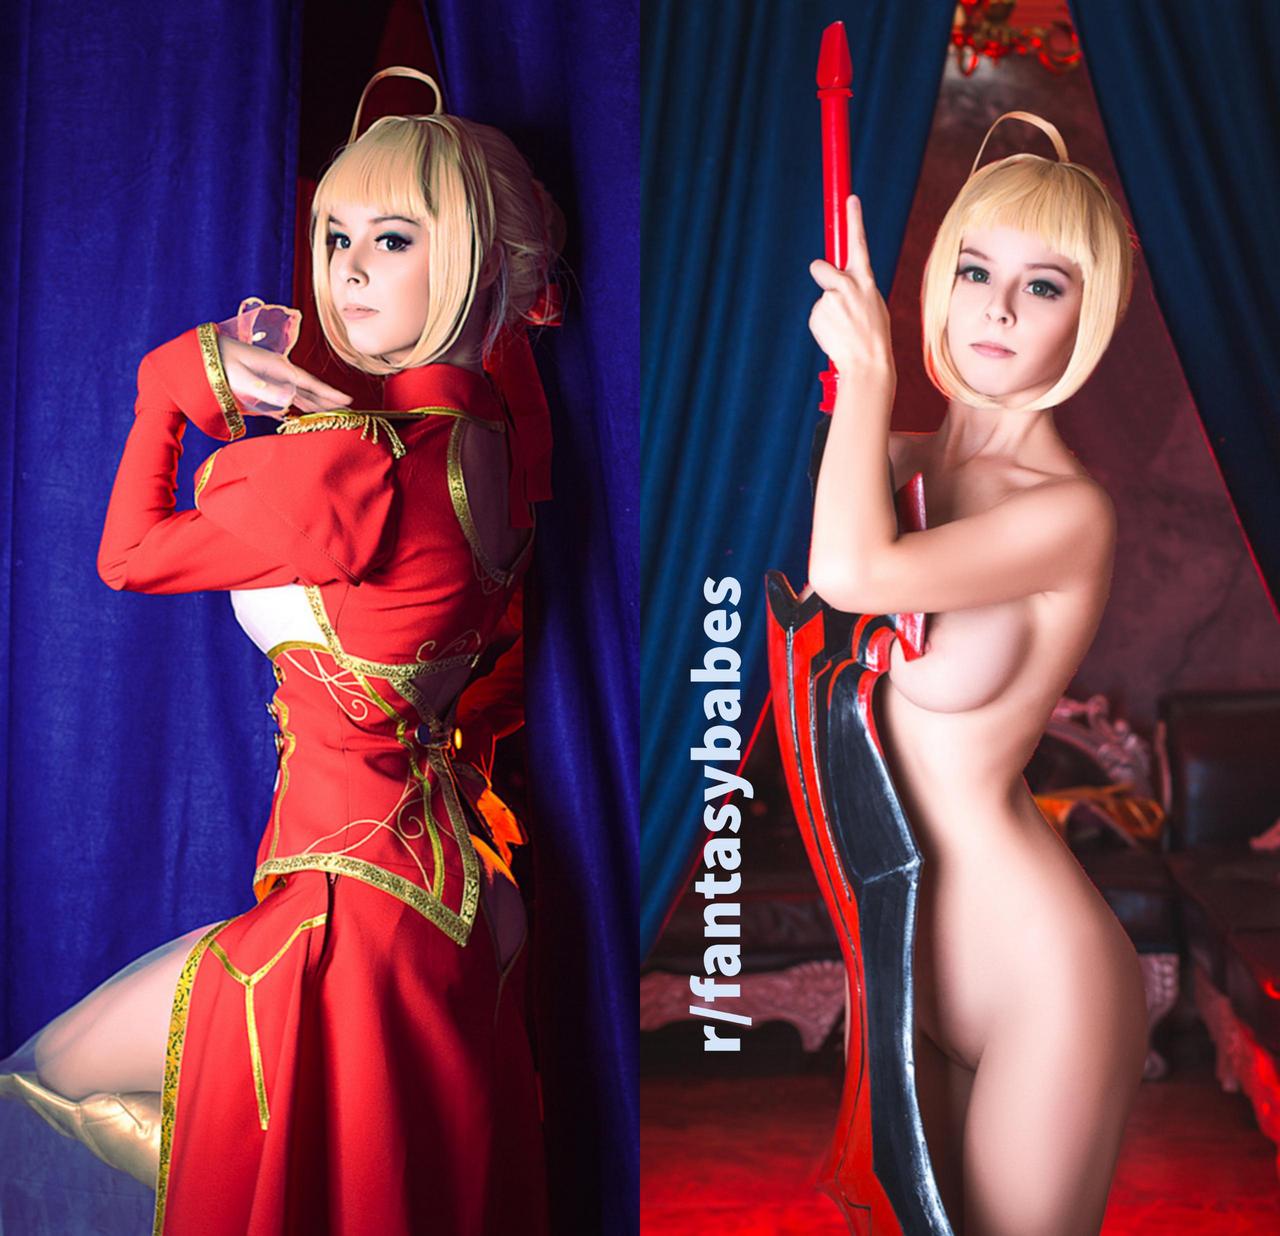 Saber Nero On Off By Helly Valentin